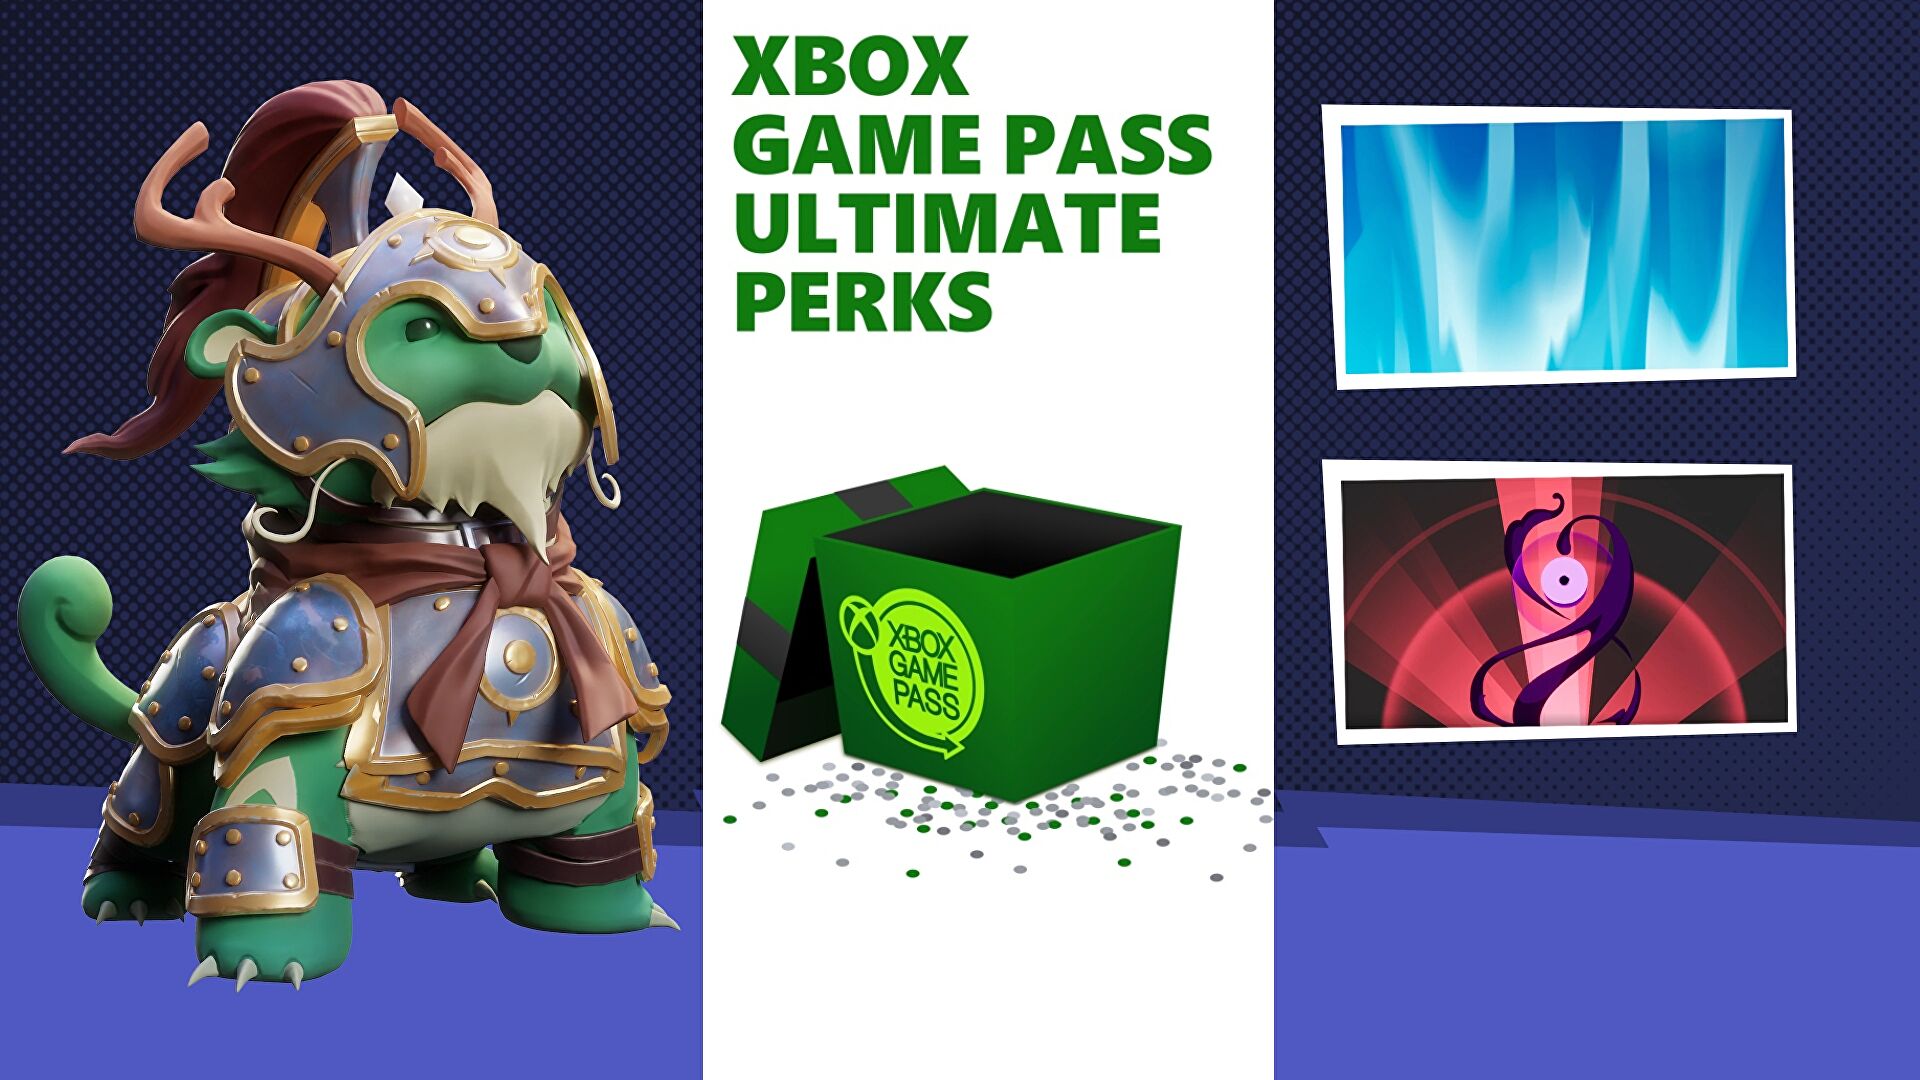 Xbox Game Pass Ultimate subscribers: don’t miss out on your bonus MultiVersus perk in August